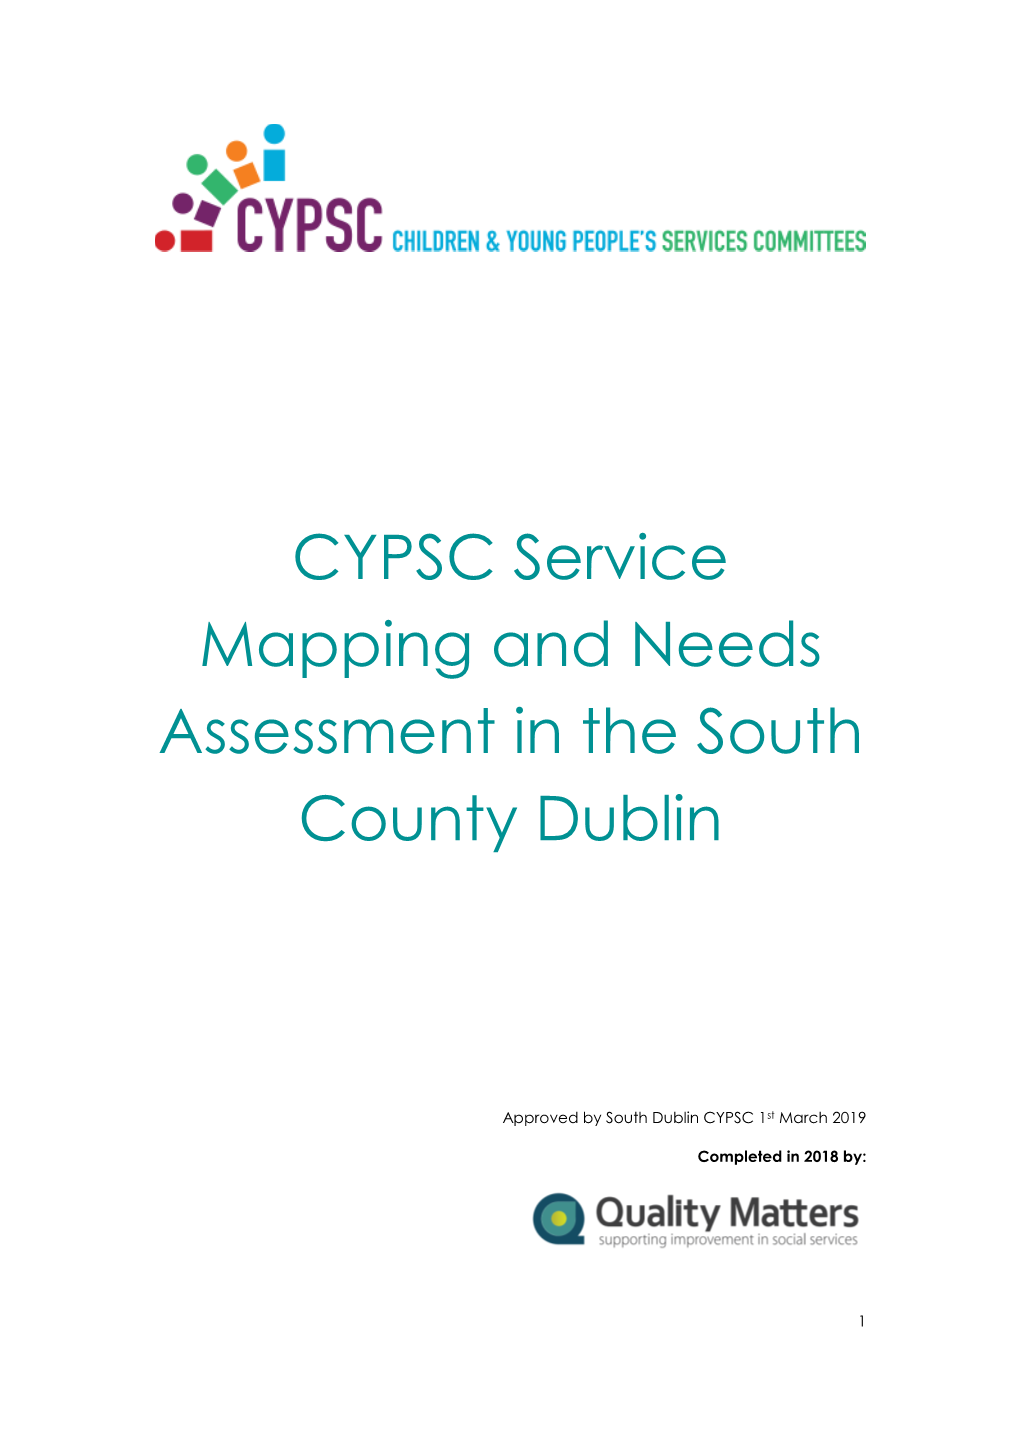 CYPSC Service Mapping and Needs Assessment in the South County Dublin